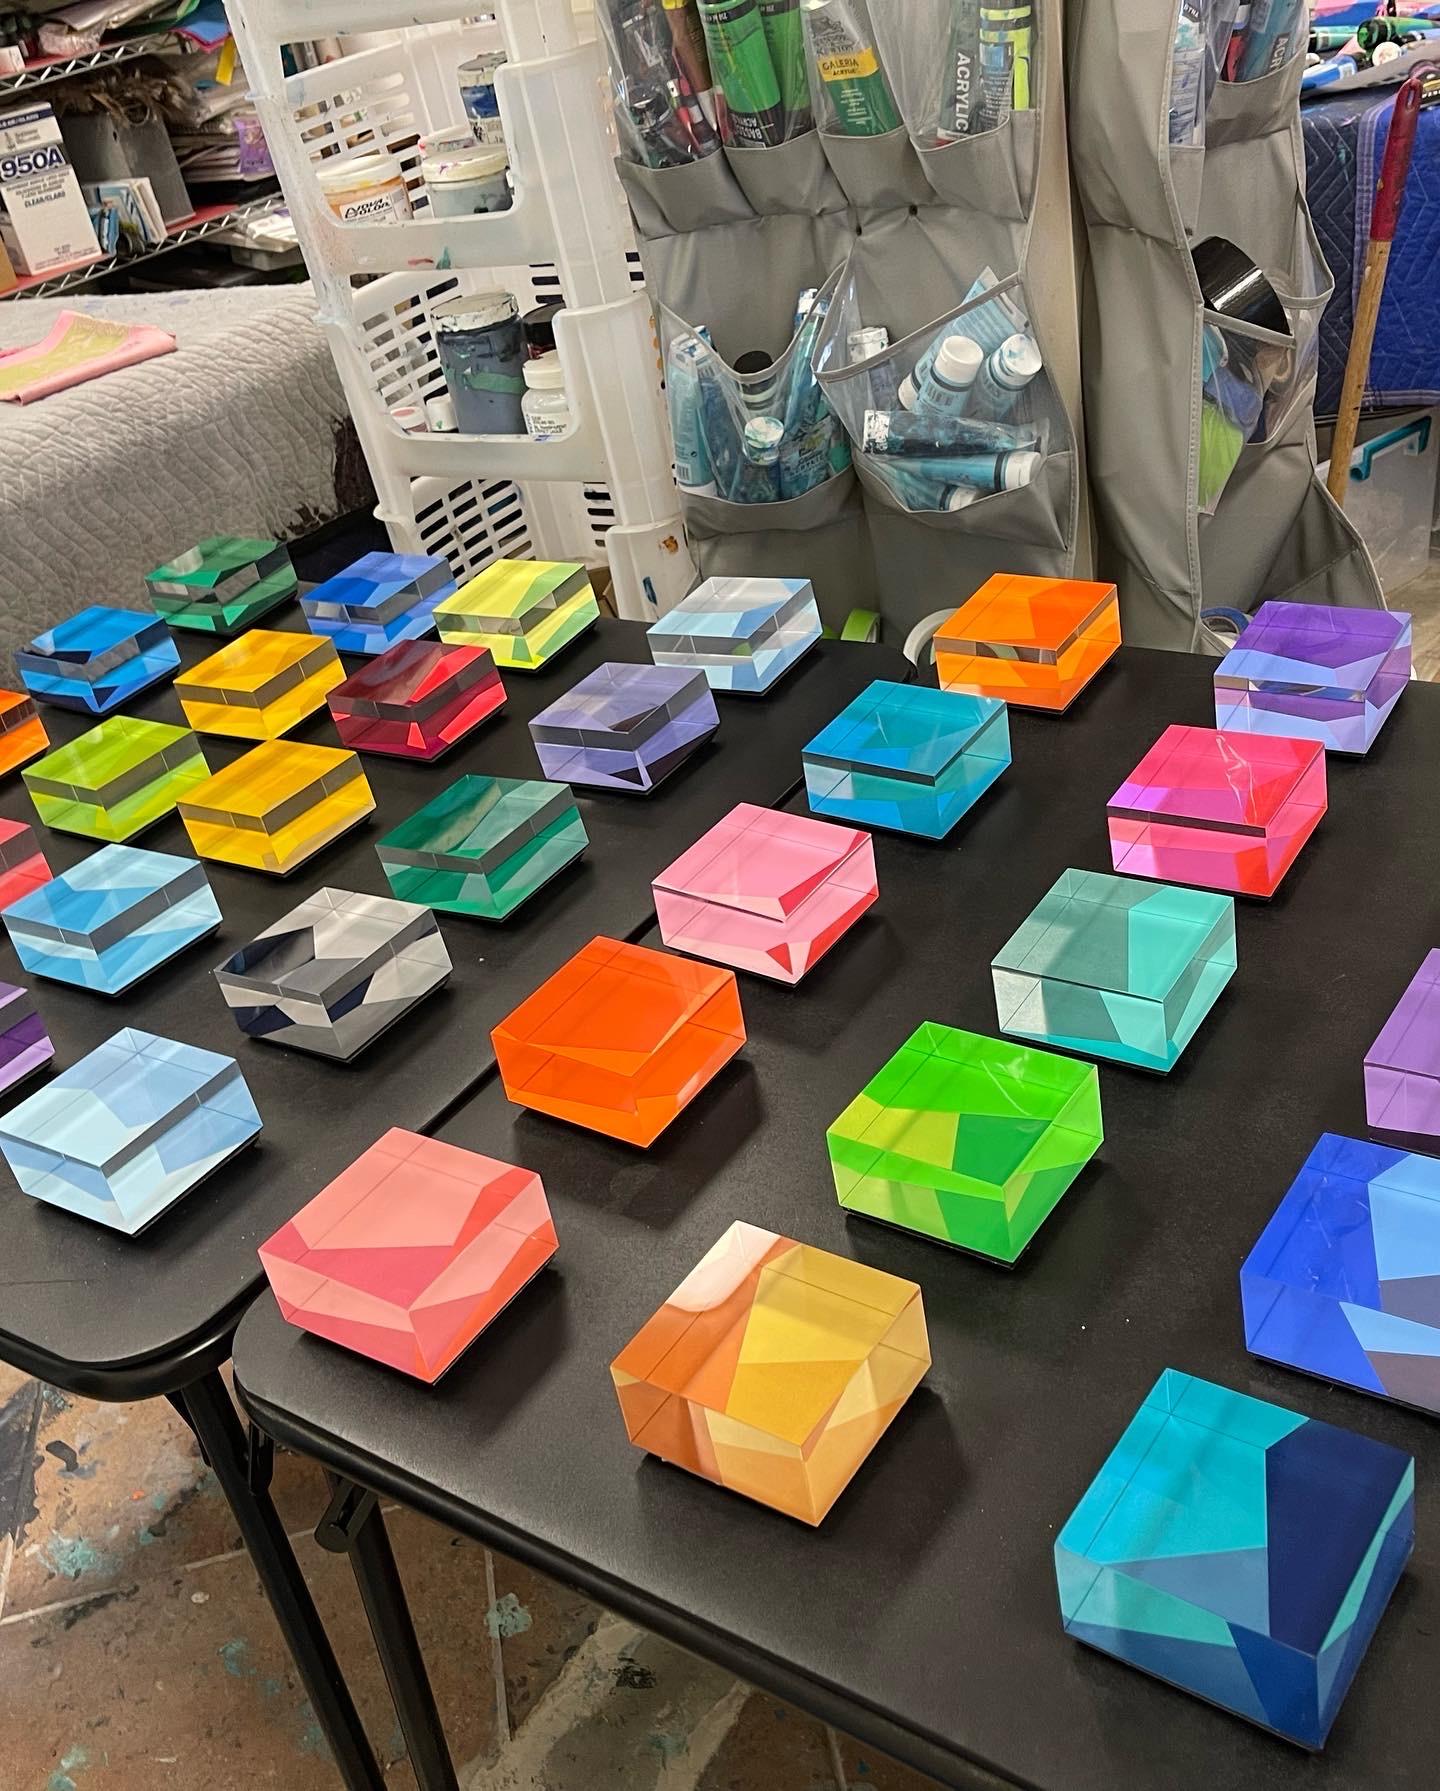 Painted Cubes For Sale